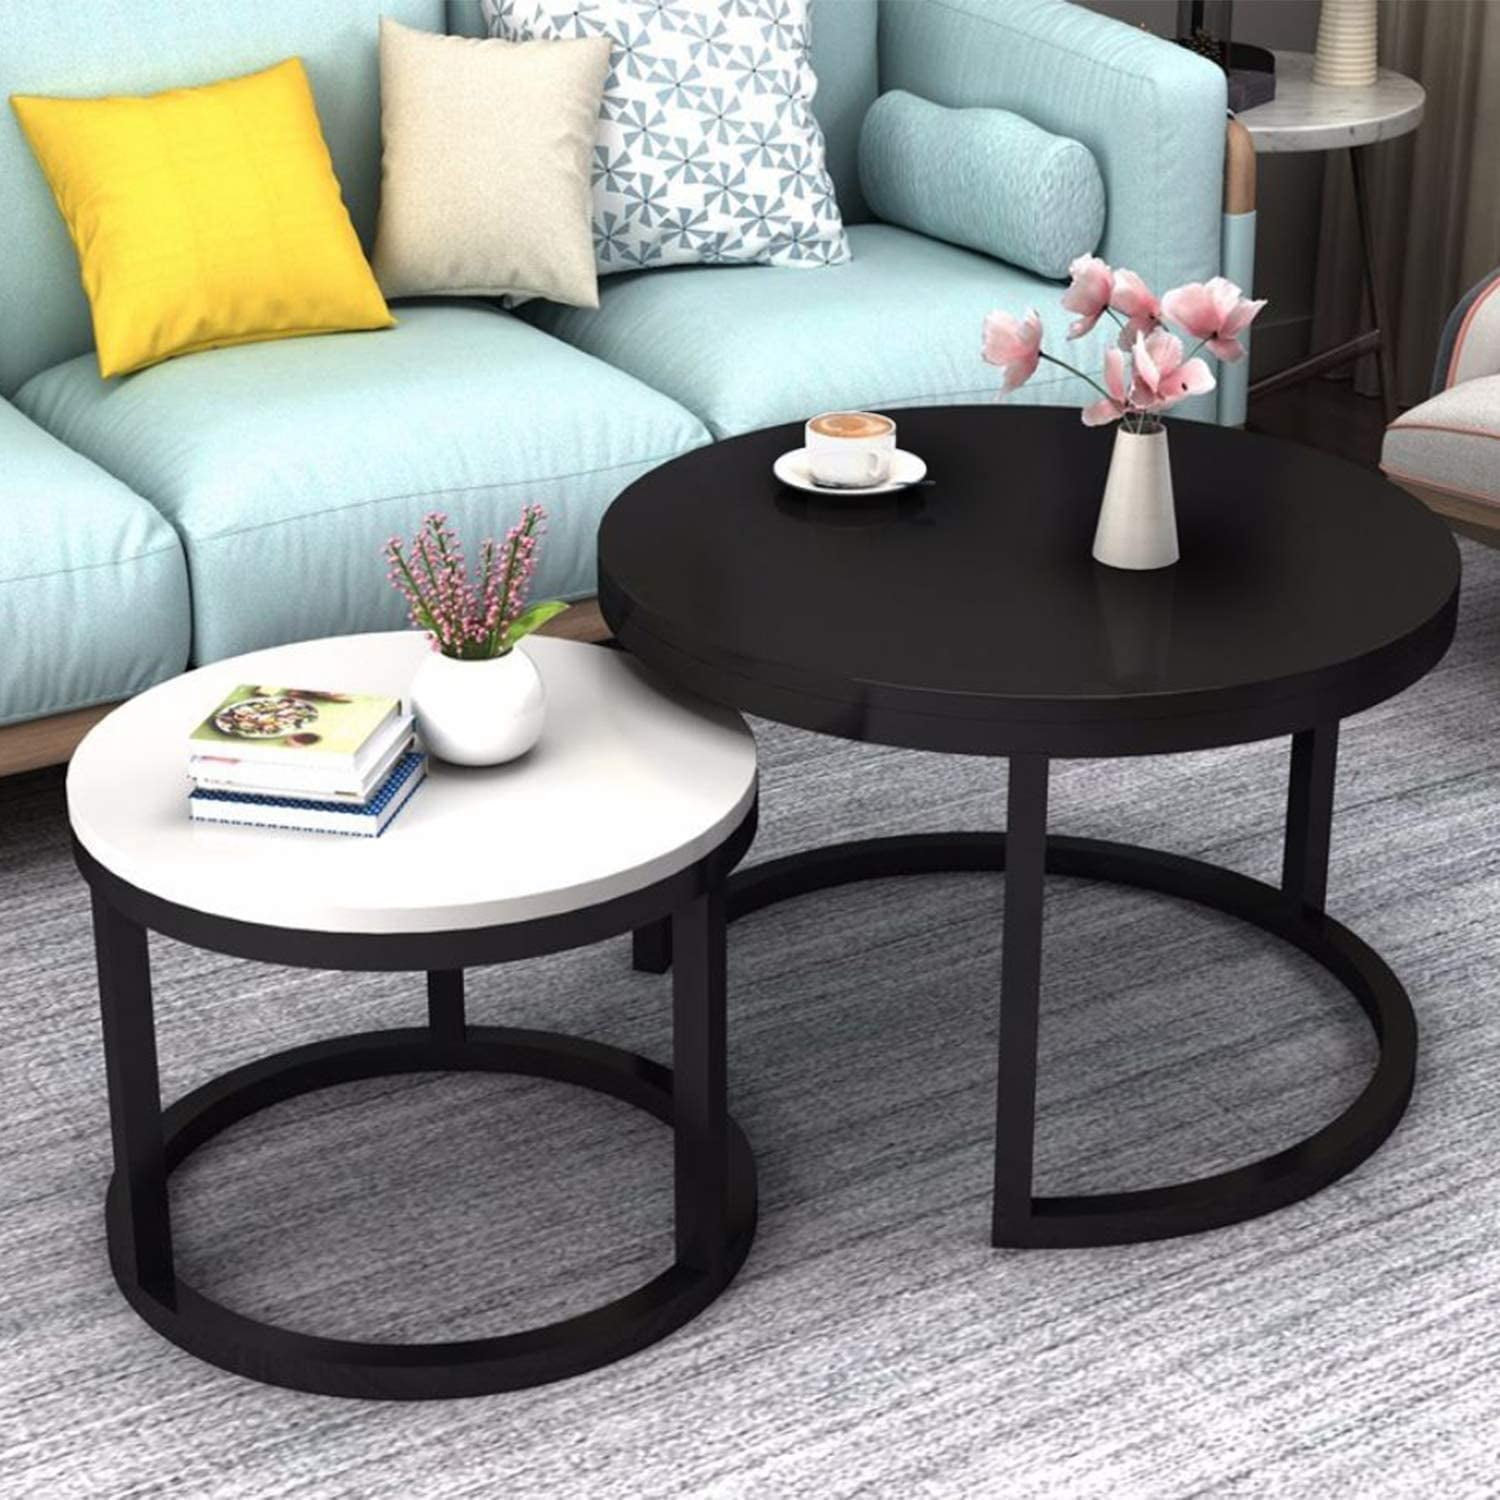 2 Round Tea Table Coffee Table Desk Sets | Black &amp; White - Twin Sets